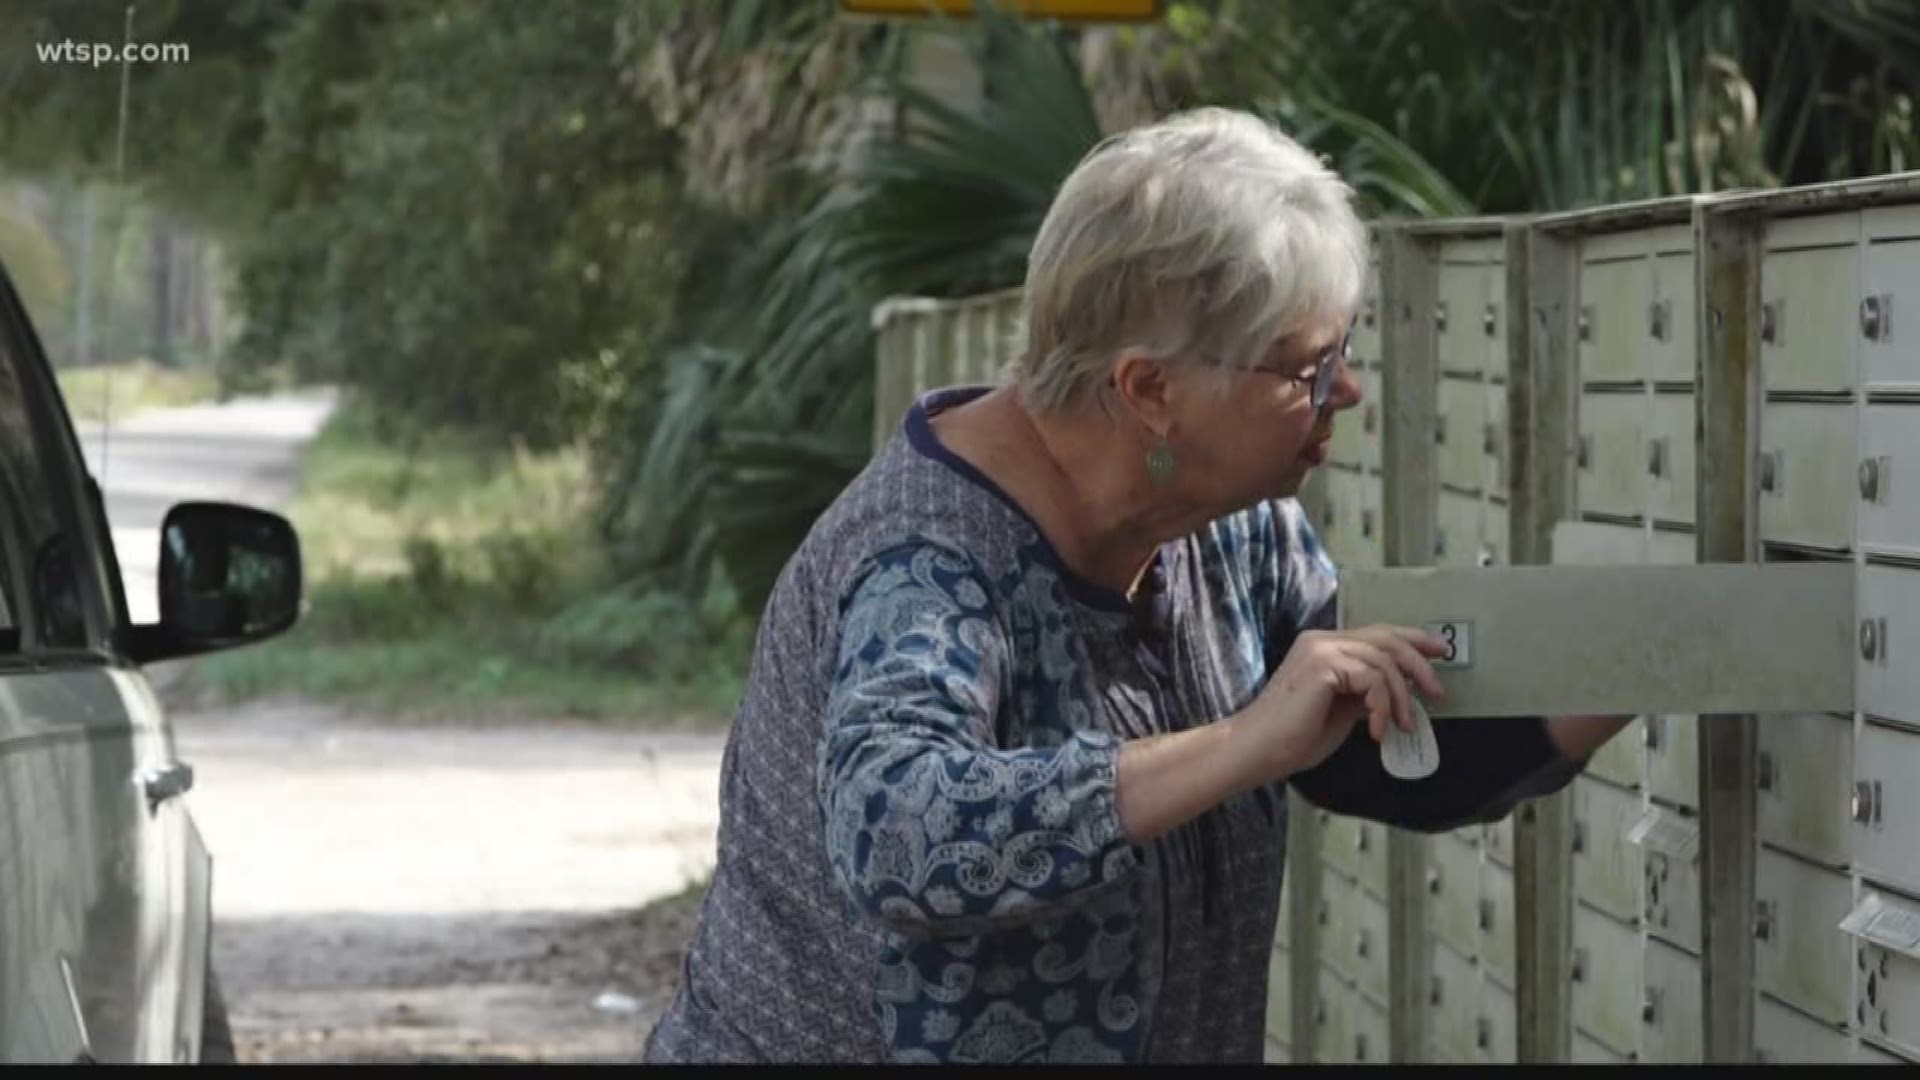 People living in this Citrus County neighborhood had to drive 10 miles to get their packages from the U.S. Postal Service.